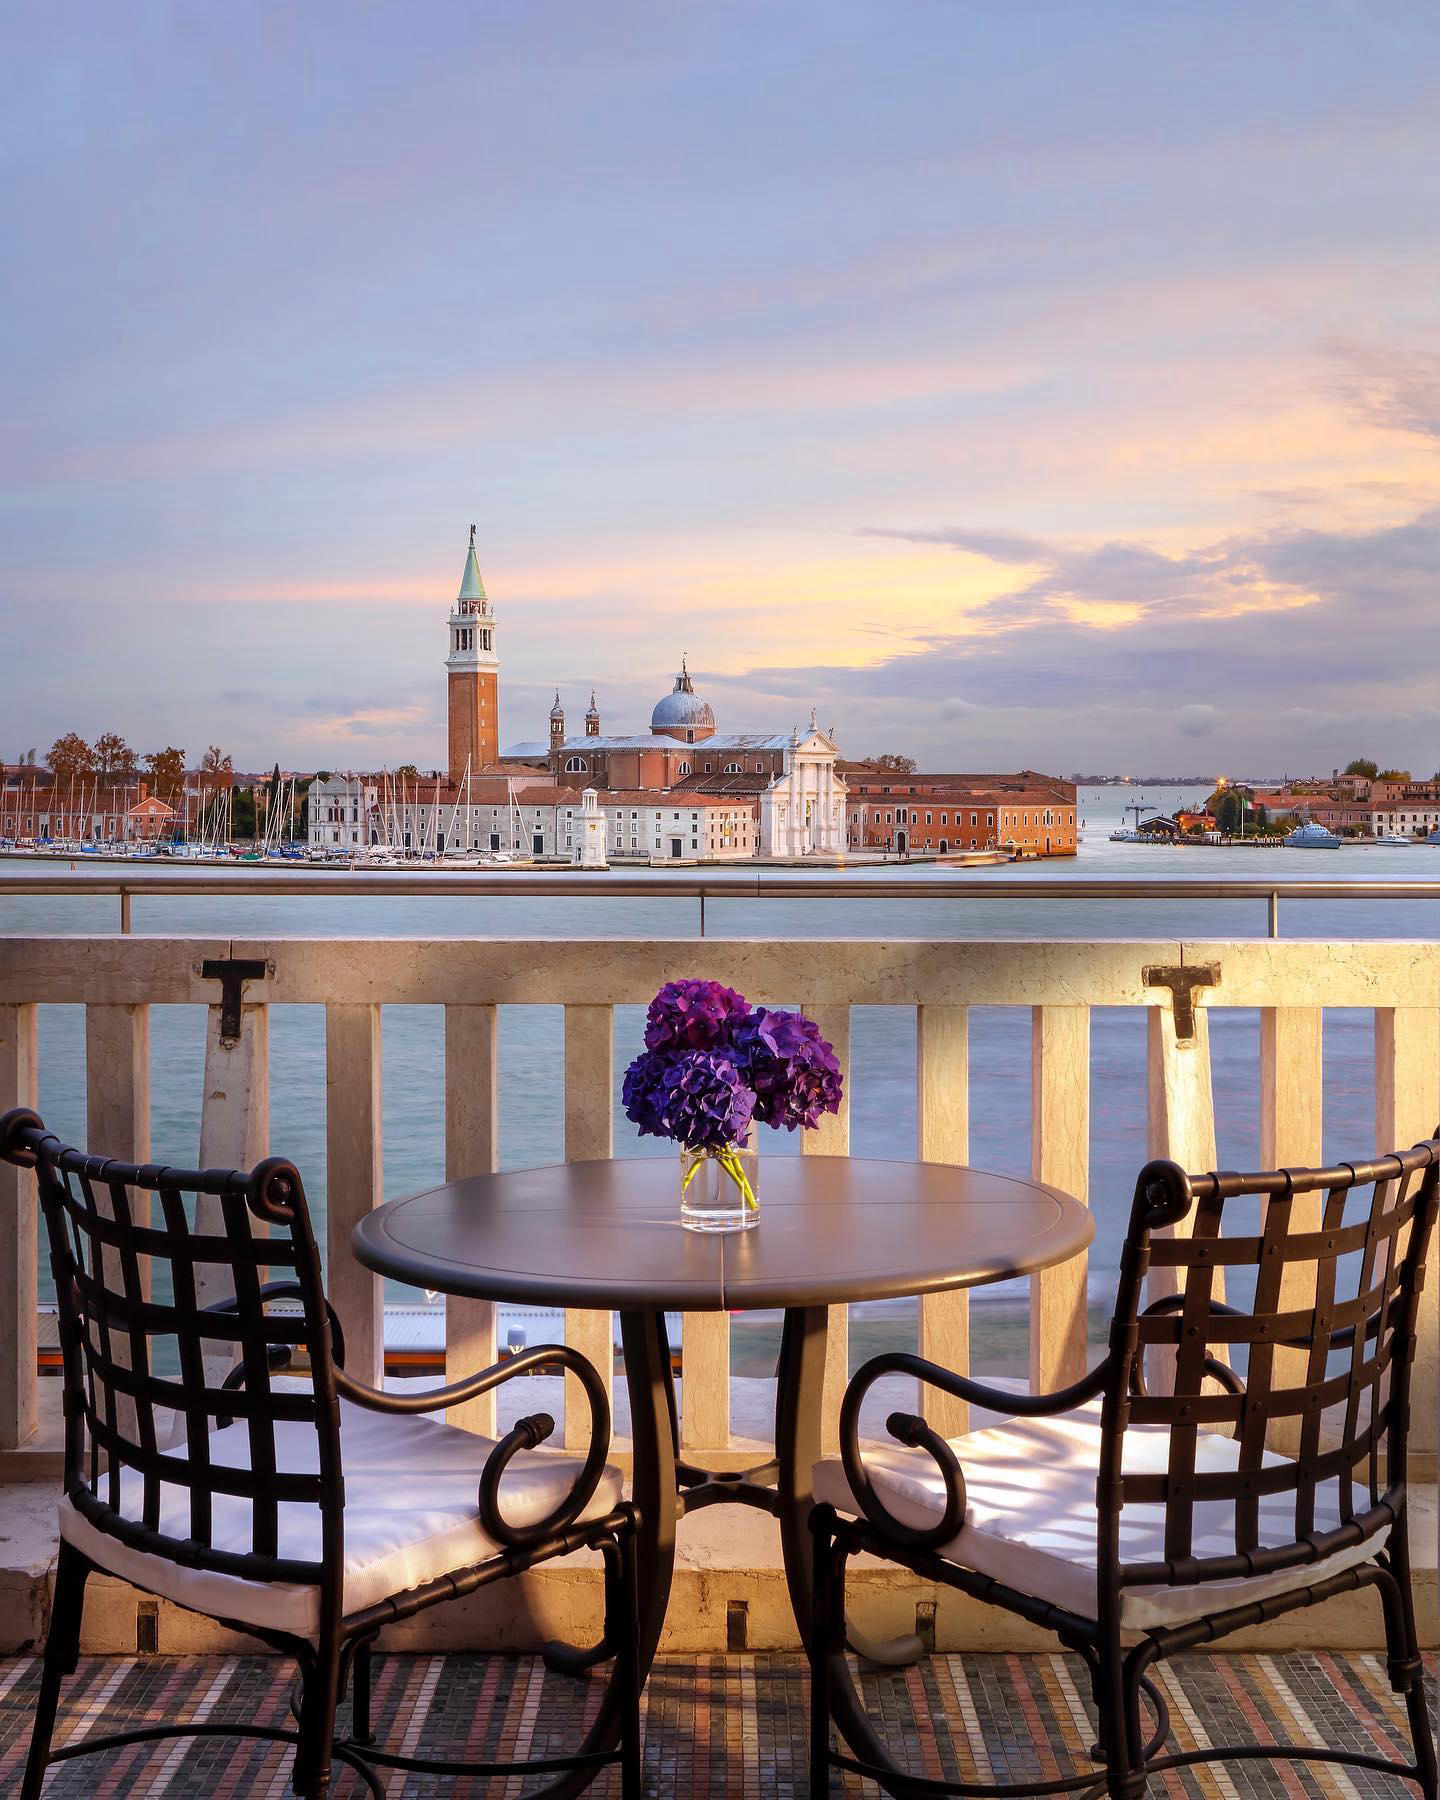 Paying tribute to the stunning views over the Bacino San Marco and its iconic monuments